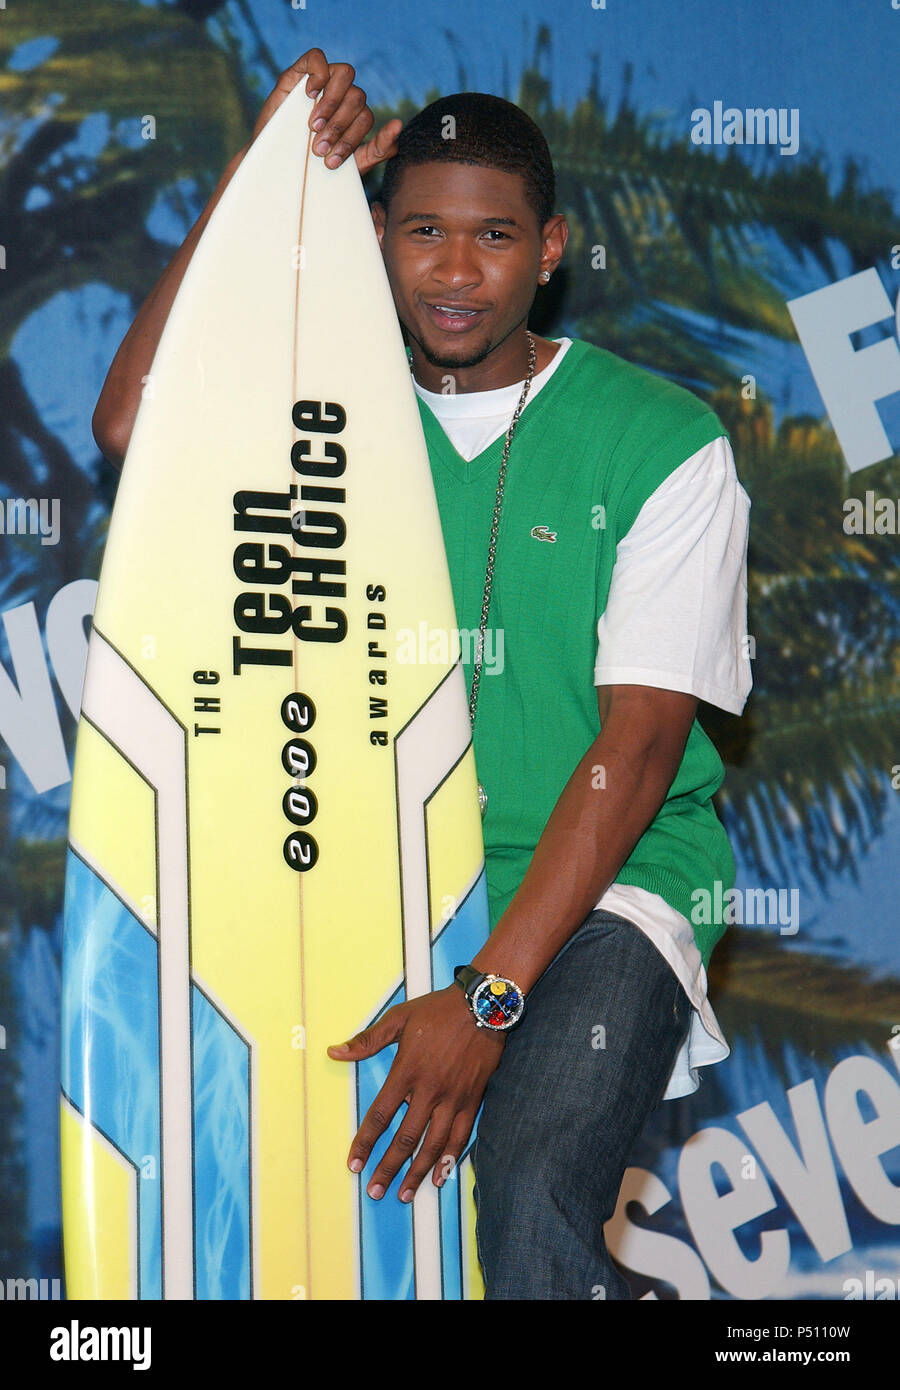 Usher backstage at the Teen Choice Awards 2002 held at the Universal Amphitheatre in Los Angeles, Ca., August 4, 2002.            -            Usher22.jpgUsher22  Event in Hollywood Life - California, Red Carpet Event, USA, Film Industry, Celebrities, Photography, Bestof, Arts Culture and Entertainment, Topix Celebrities fashion, Best of, Hollywood Life, Event in Hollywood Life - California,  backstage trophy, Awards show, movie celebrities, TV celebrities, Music celebrities, Topix, Bestof, Arts Culture and Entertainment, Photography,    inquiry tsuni@Gamma-USA.com , Credit Tsuni / USA, 2000-2 Stock Photo